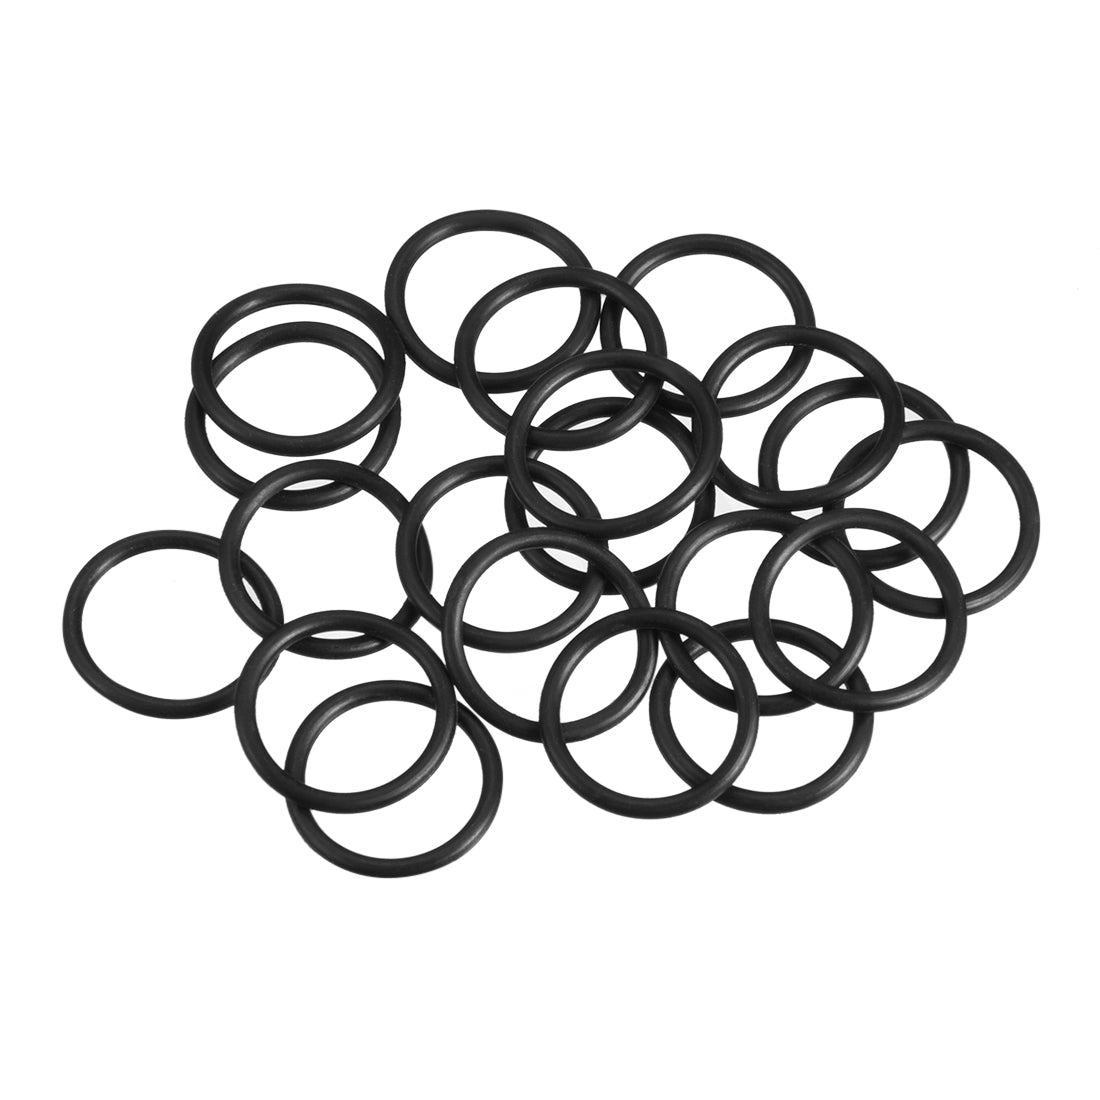 uxcell Uxcell O-Rings Nitrile Rubber 15mm x 18.6mm x 1.8mm Seal Rings Sealing Gasket 20pcs